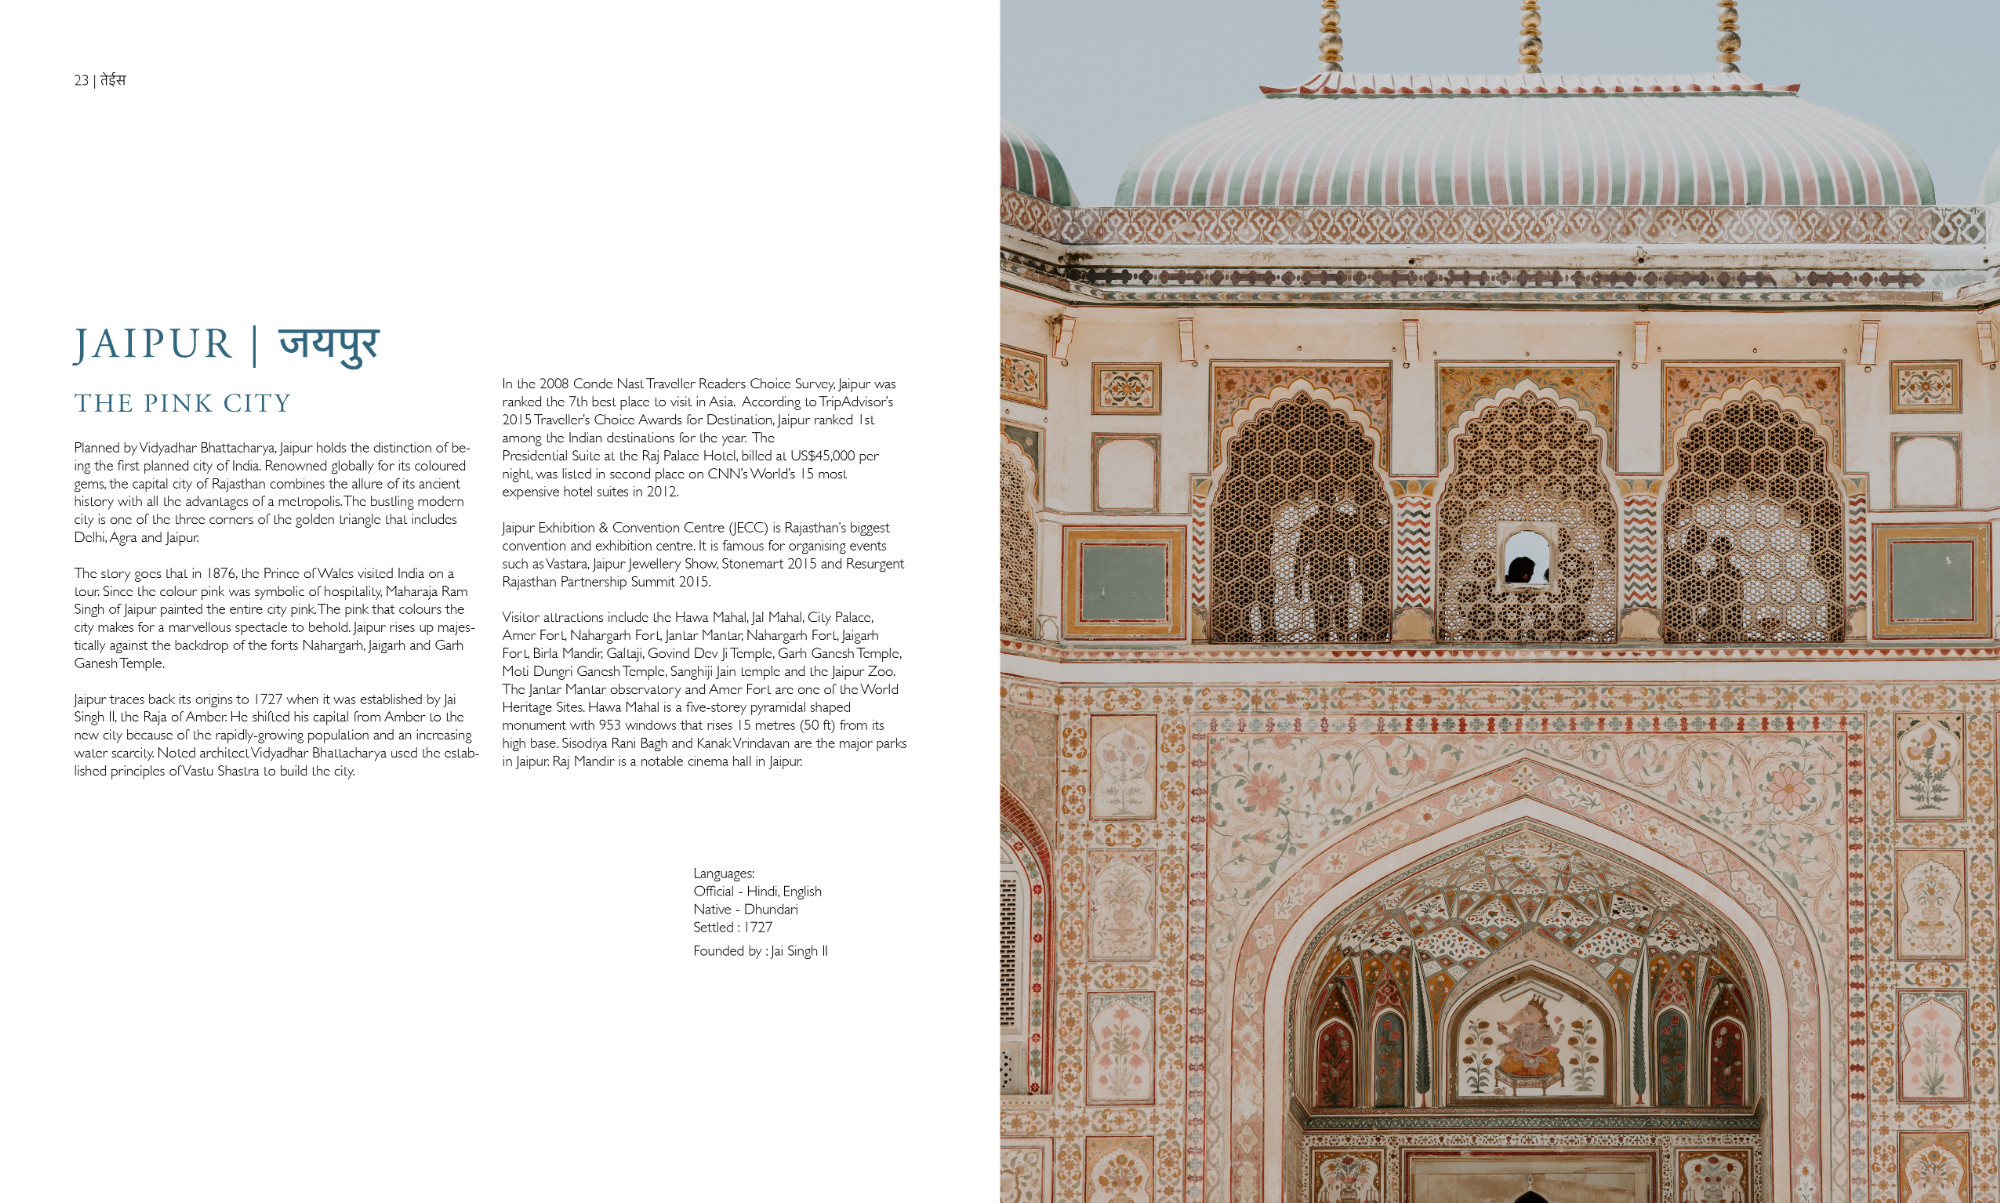 This spread talks about famous tourist destinations in detail. This spread is about Jaipur and further discusses history, fairs and tourists attractions. Gauri Sirure.